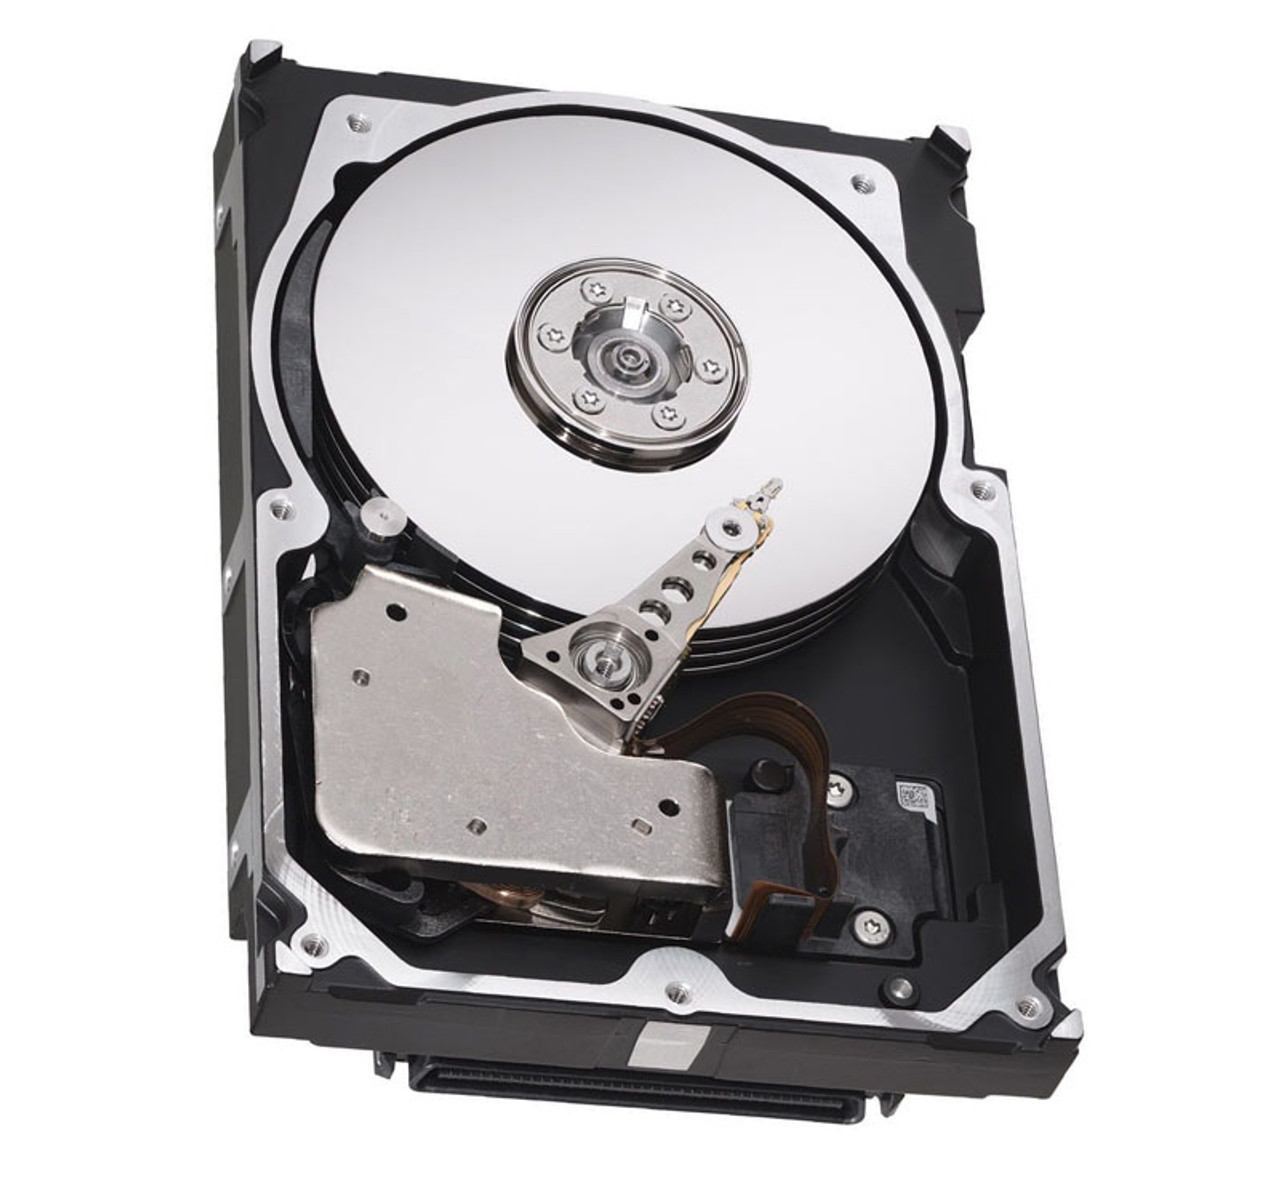 A5531-67003 - HP 18.2GB 10000RPM Ultra-2 Wide SCSI Hot-Pluggable LVD 80-Pin 3.5-inch Hard Drive